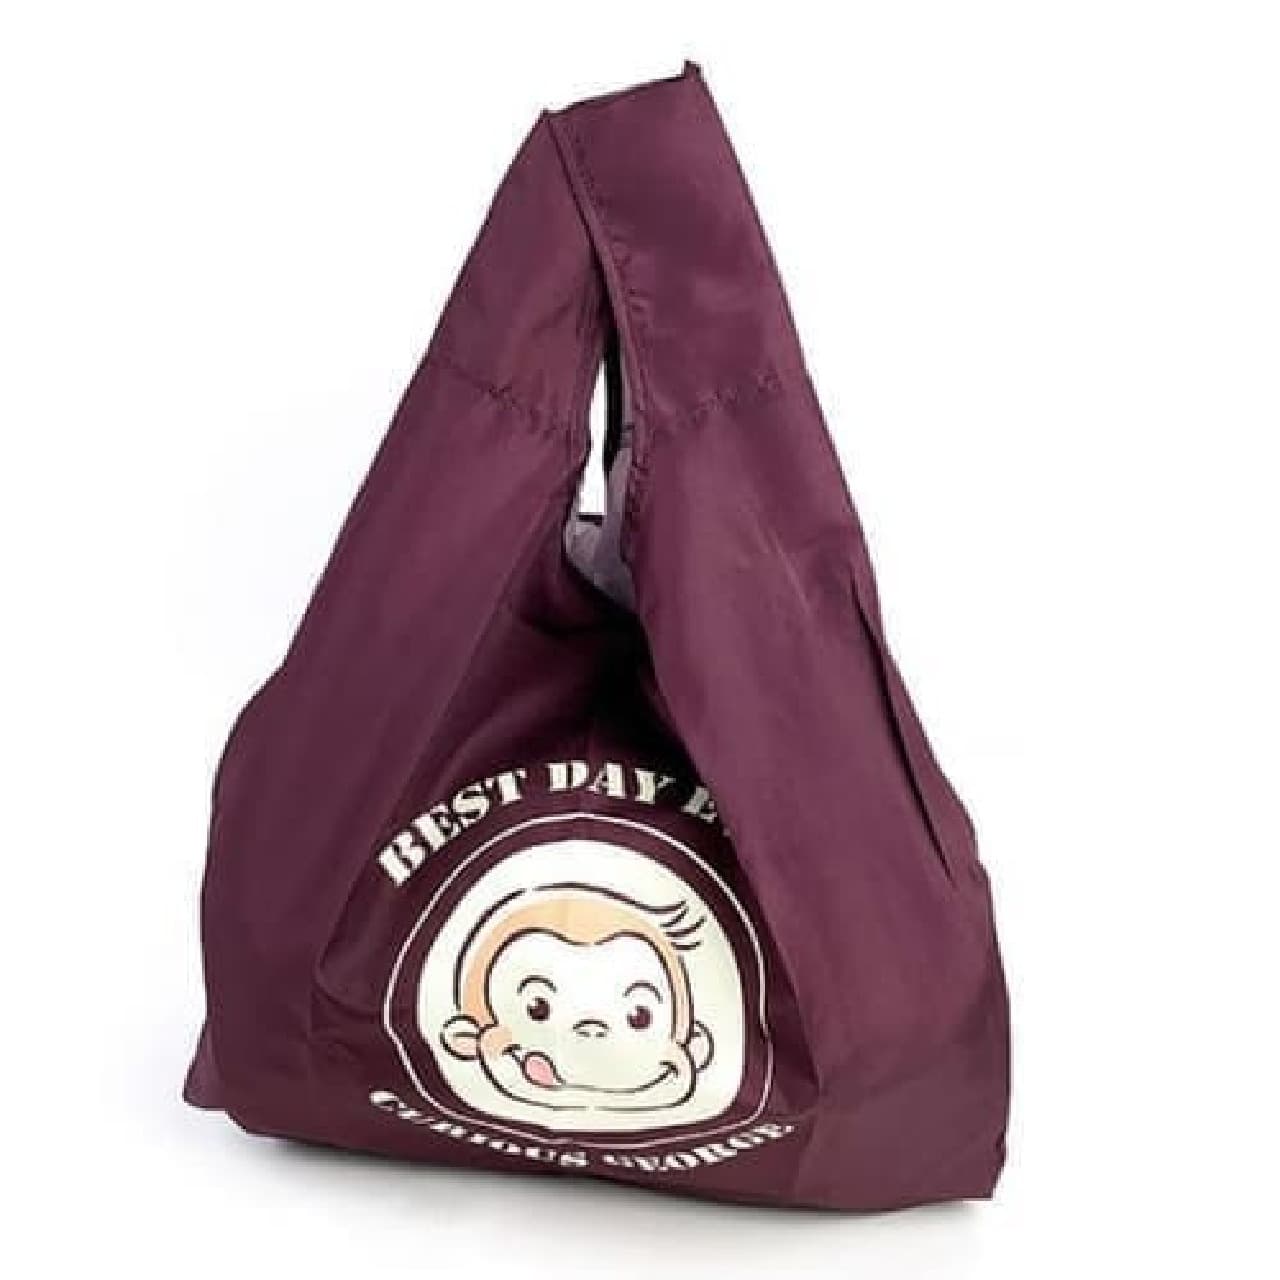 Autumn-like colors are also wonderful ♪ "Curious George" eco bag --with storage pouch